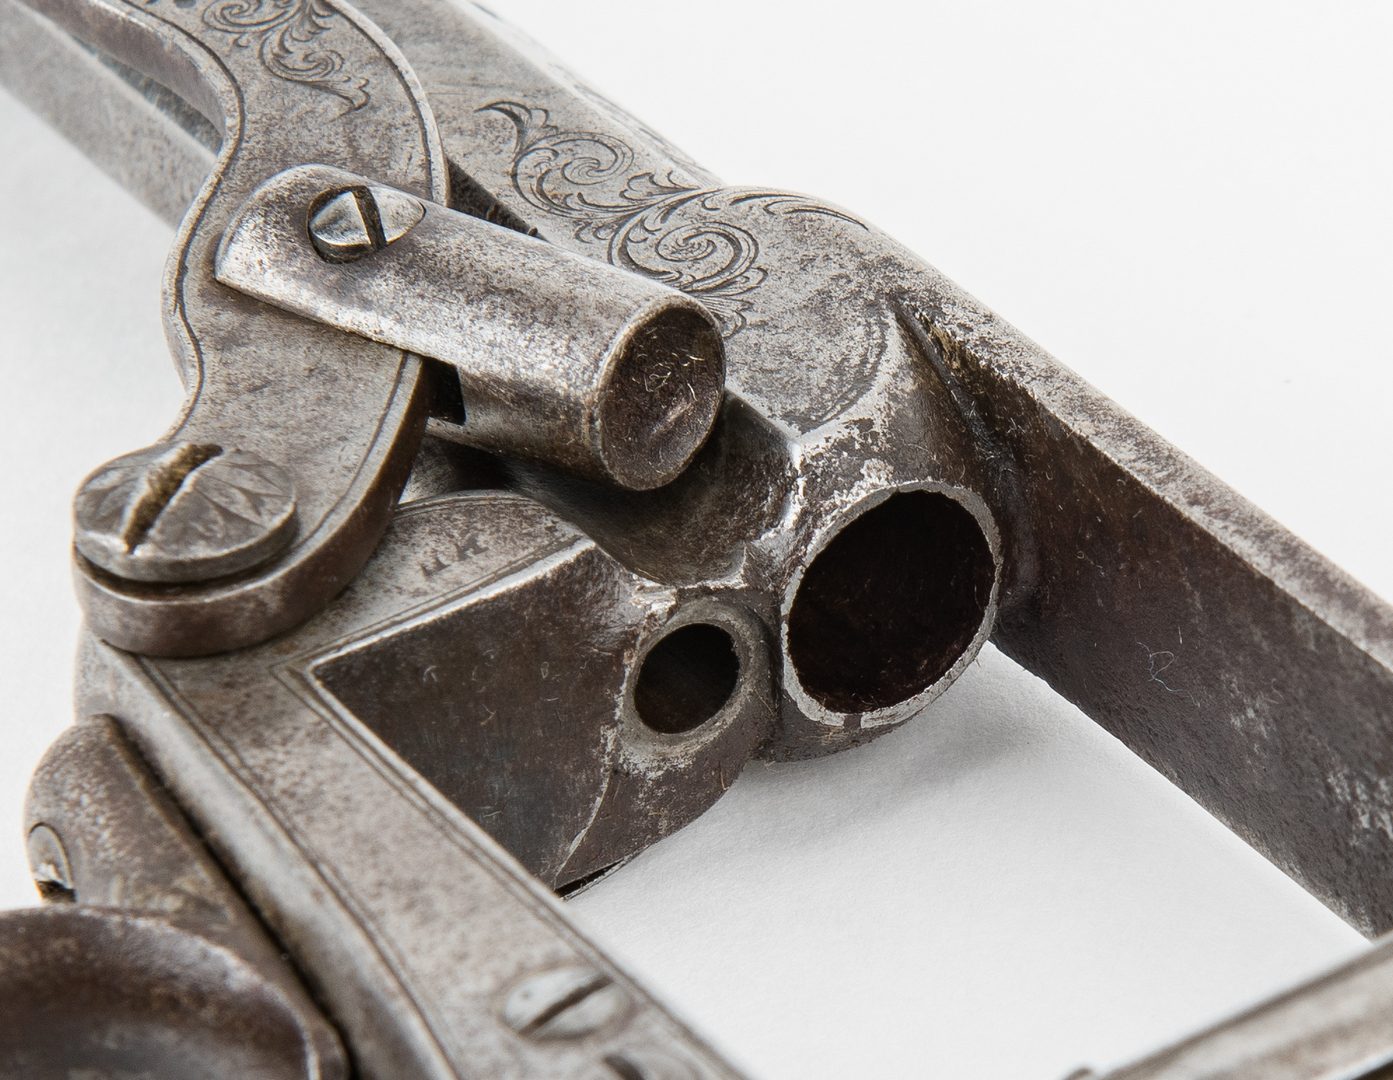 Lot 301: New Orleans and Vicksburg Agent Marked Tranter items, incl. Revolver, Holster